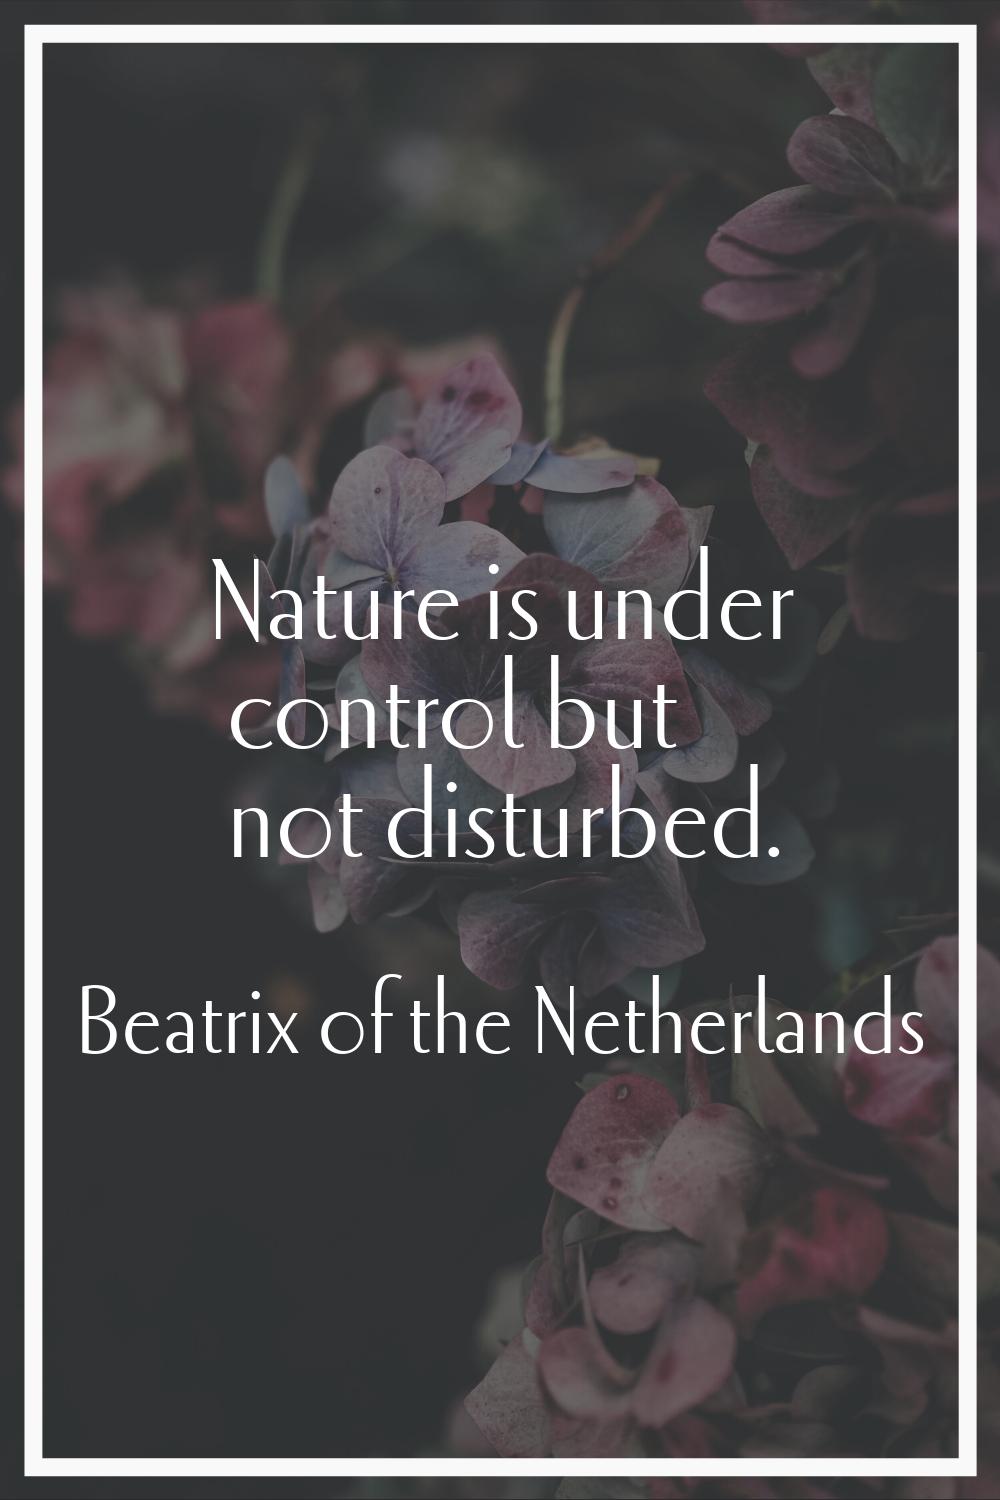 Nature is under control but not disturbed.